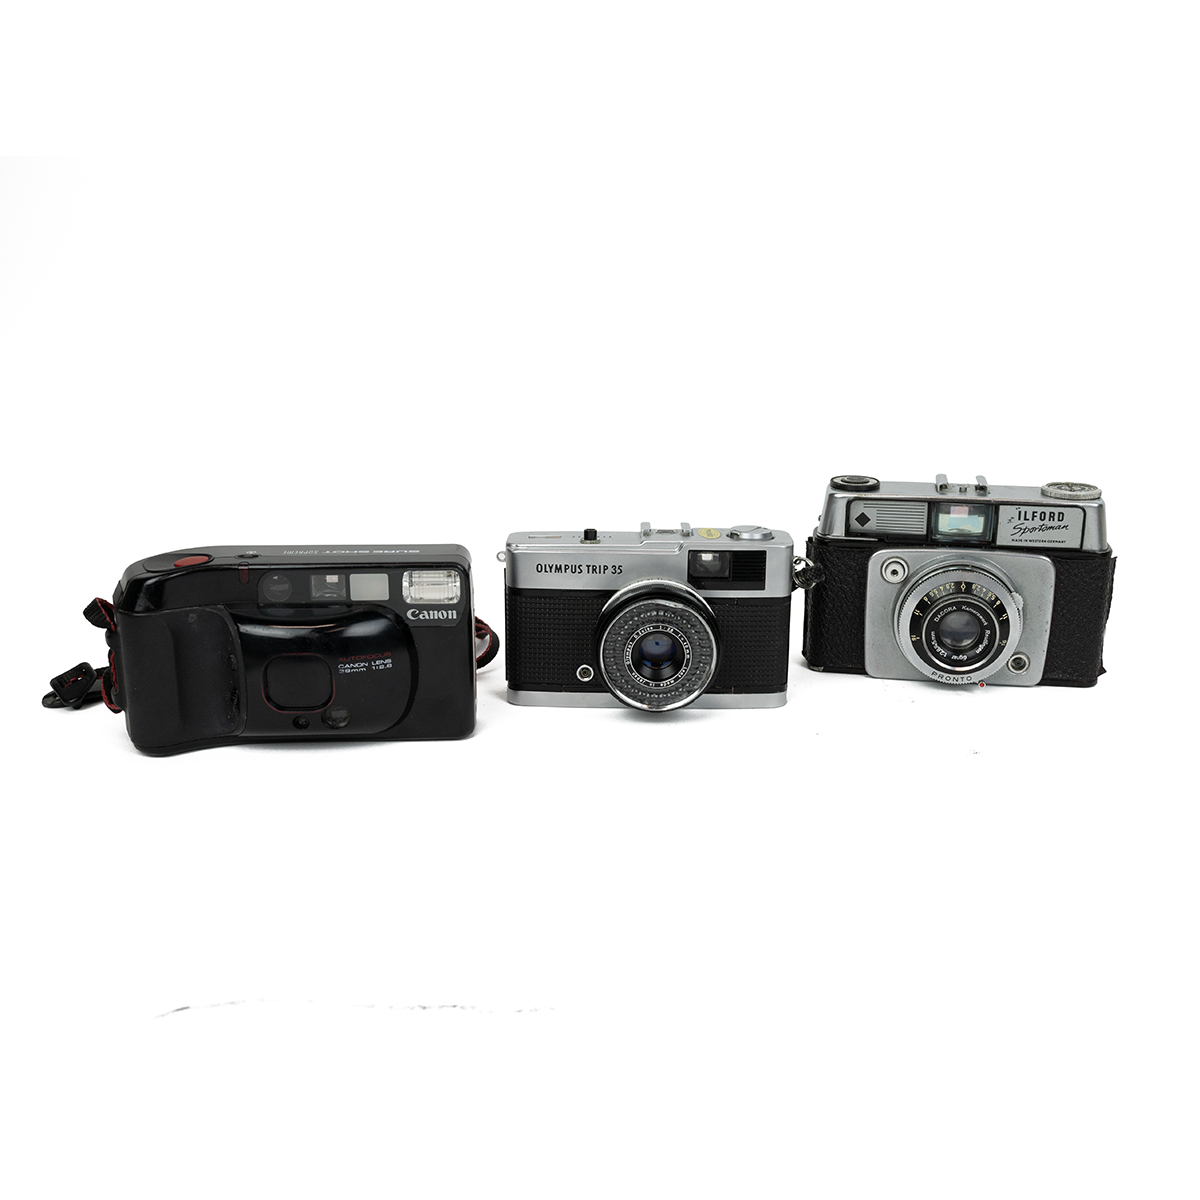 Cameras - Olympus Trip 35 with flash and carry bag, Ilford Sportsman in carry case, Cannon Suresh... - Image 2 of 7